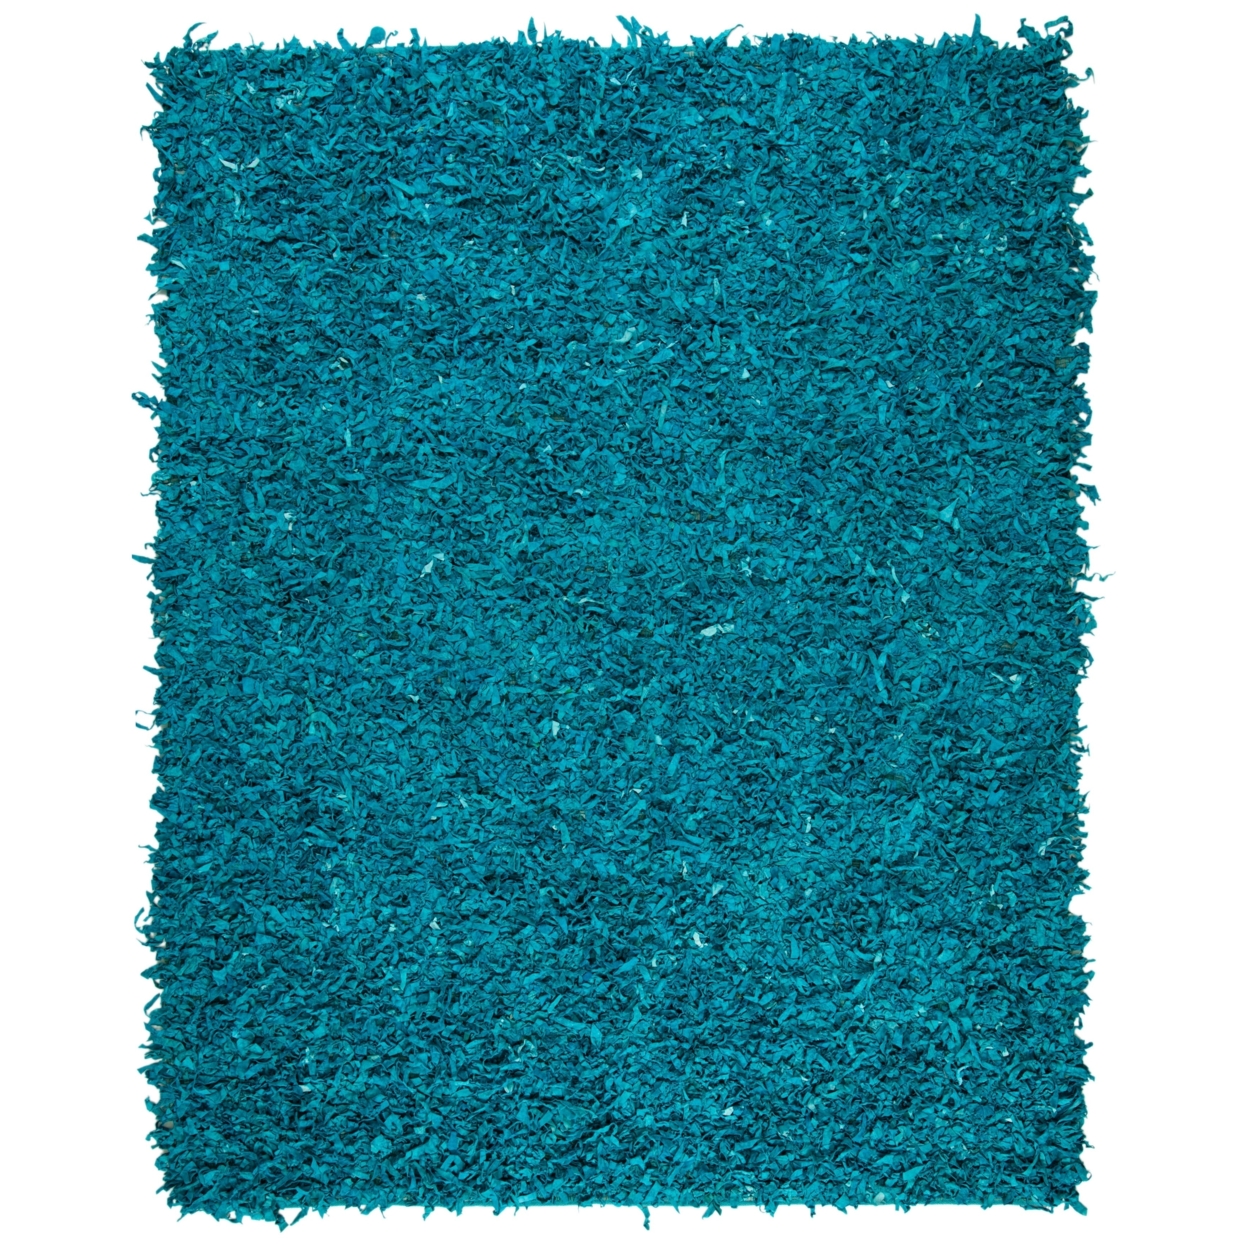 SAFAVIEH Leather Shag LSG511L Hand-knotted Light Blue Rug - 5' X 8'